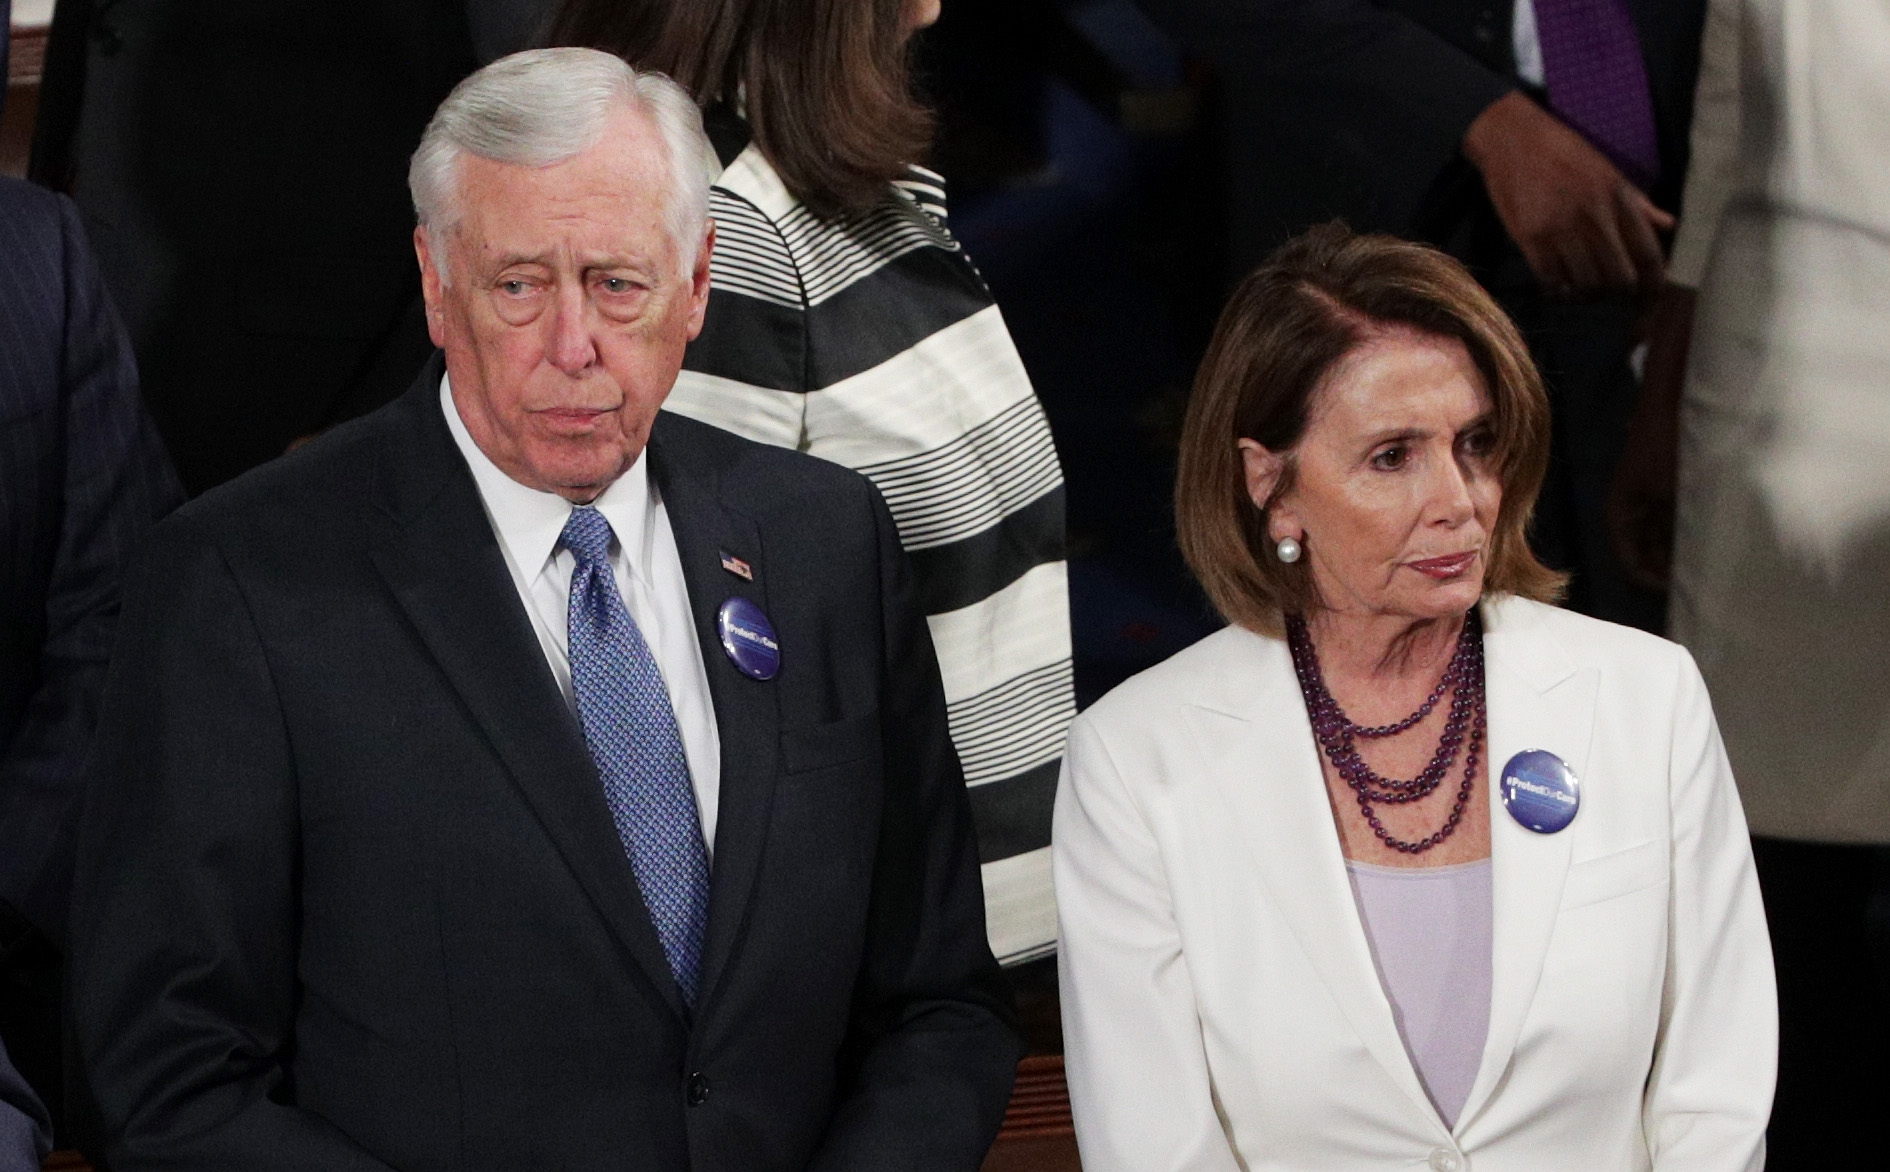 Steny Hoyer and Nancy Pelosi arrive to a joint session of the U.S. Congress with President Trump on Feb. 28, 2017 in the House chamber of  the U.S. Capitol in Washington, DC. (Alex Wong—Getty Images)